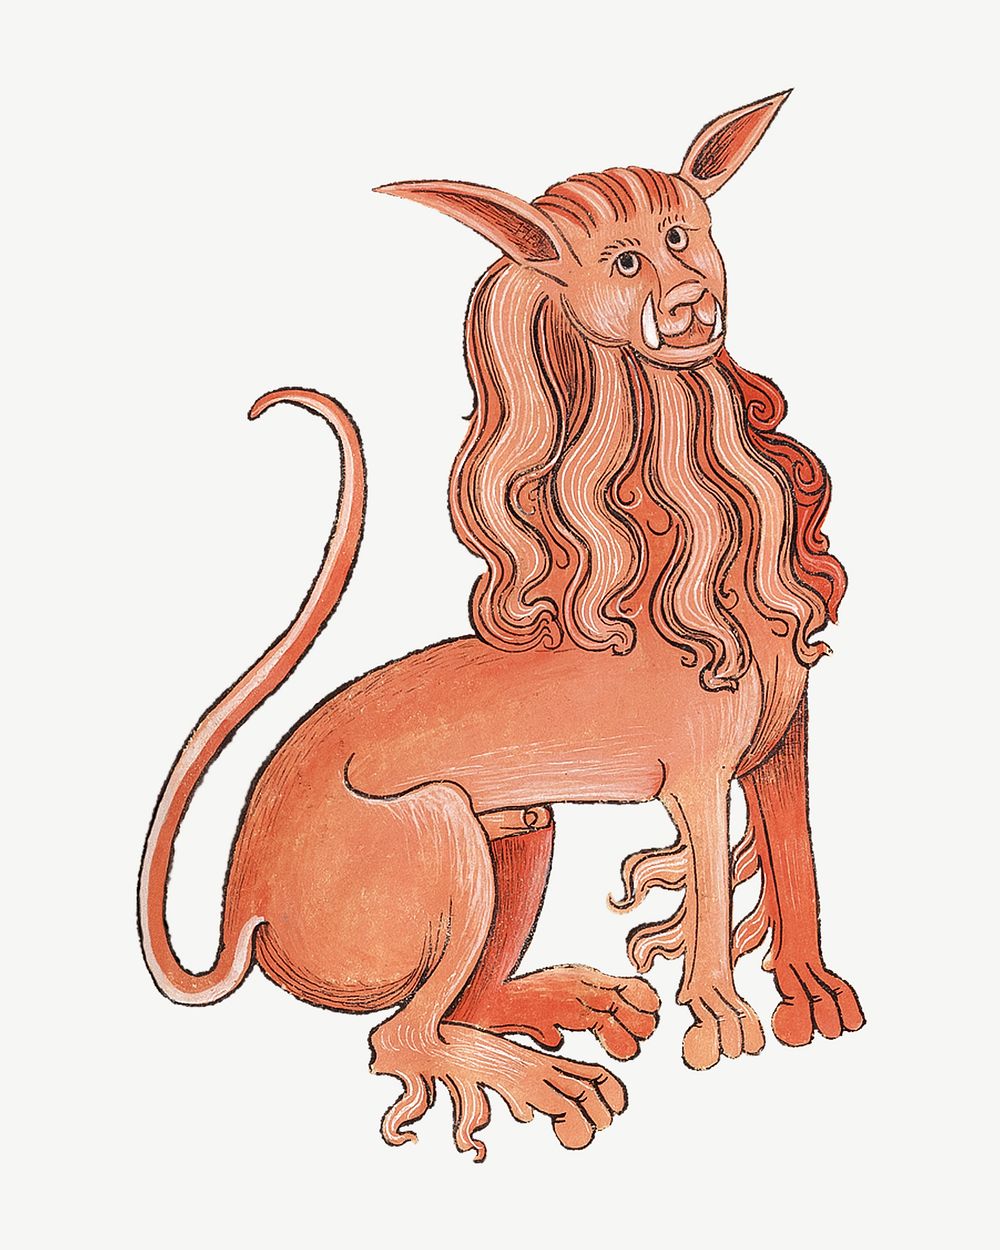 Lion, vintage mythical creature illustration psd.  Remixed by rawpixel. 